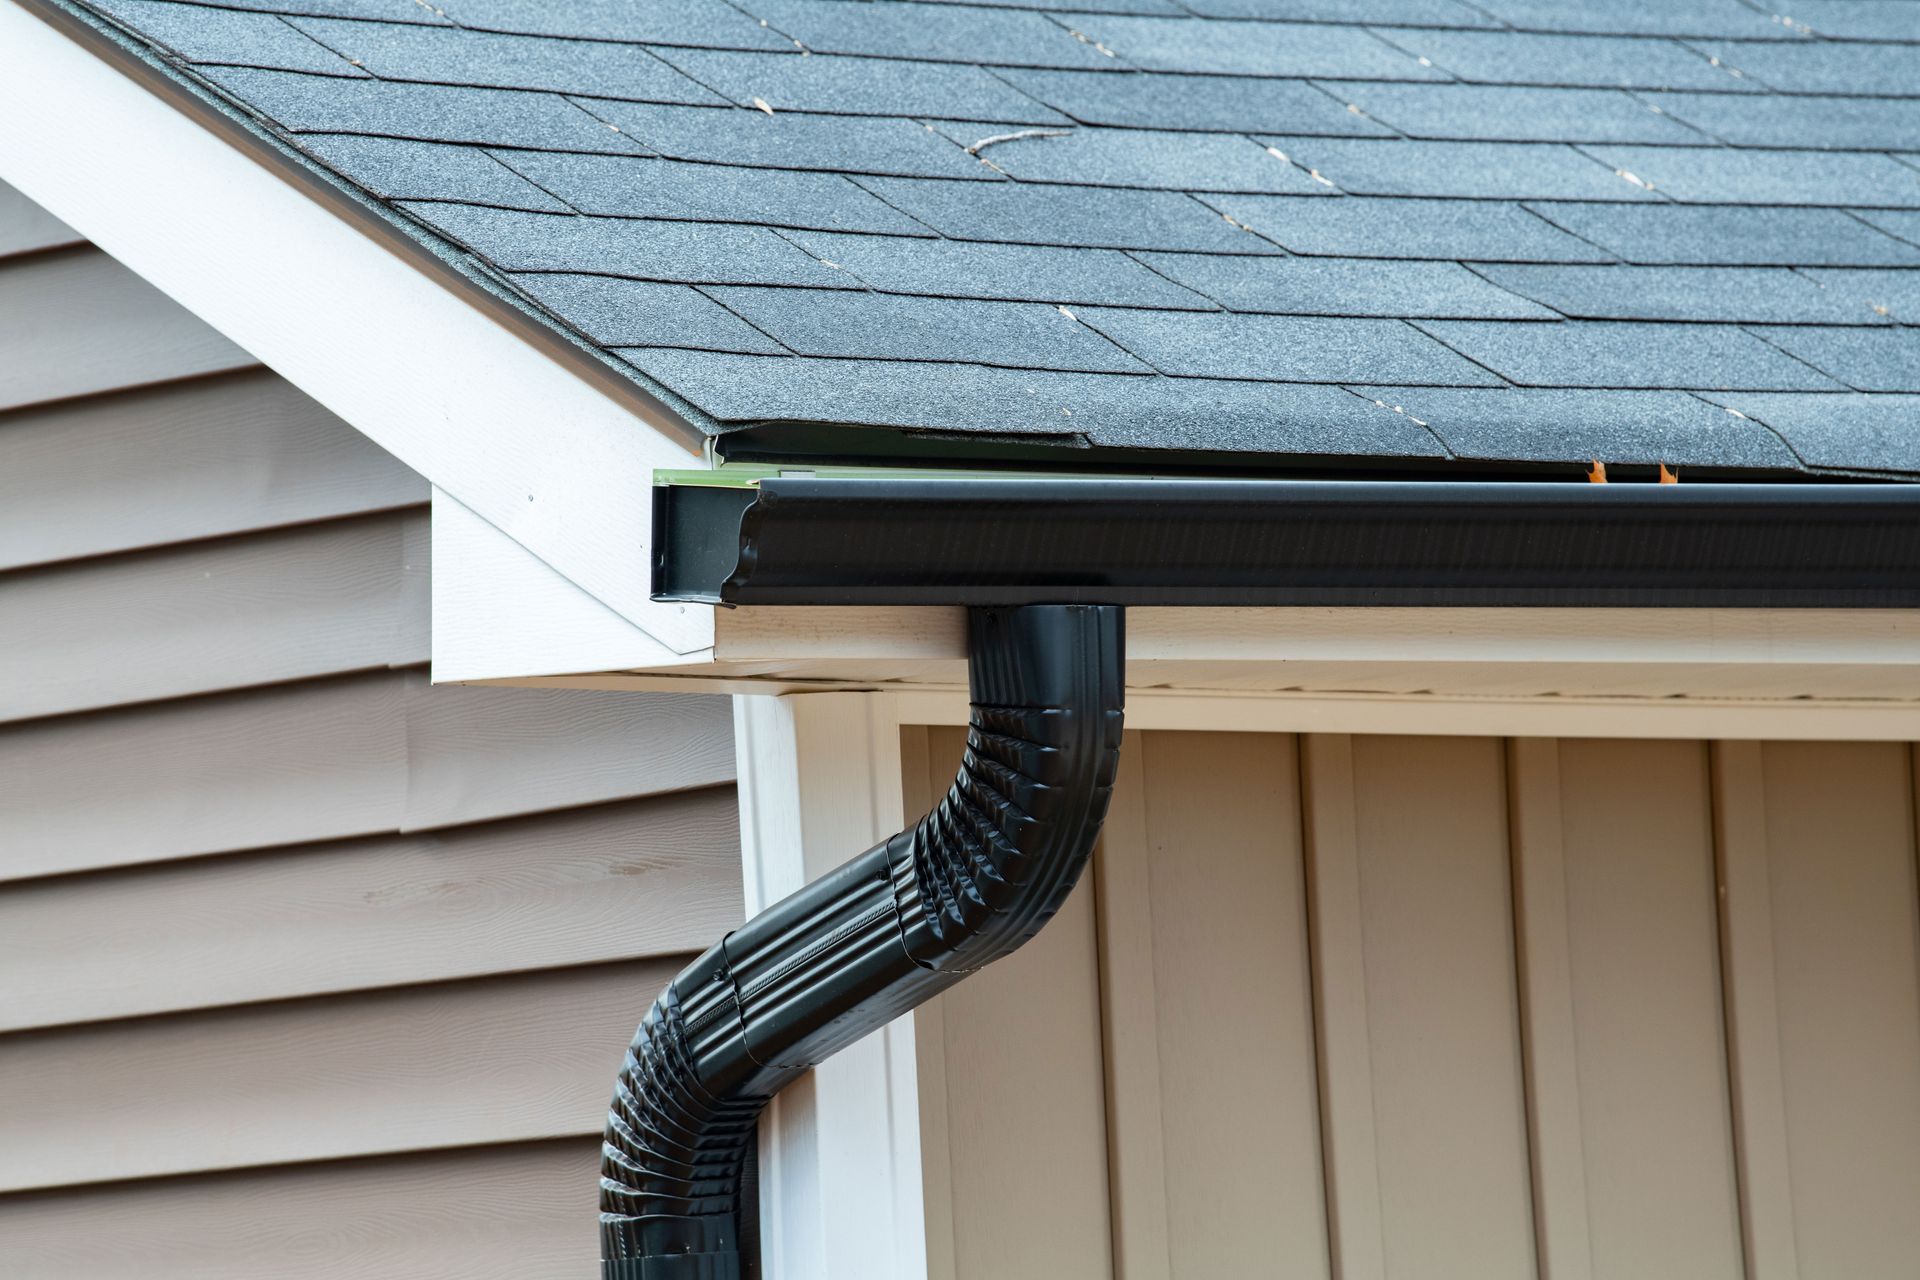 Gutters Service in Vernon, CT